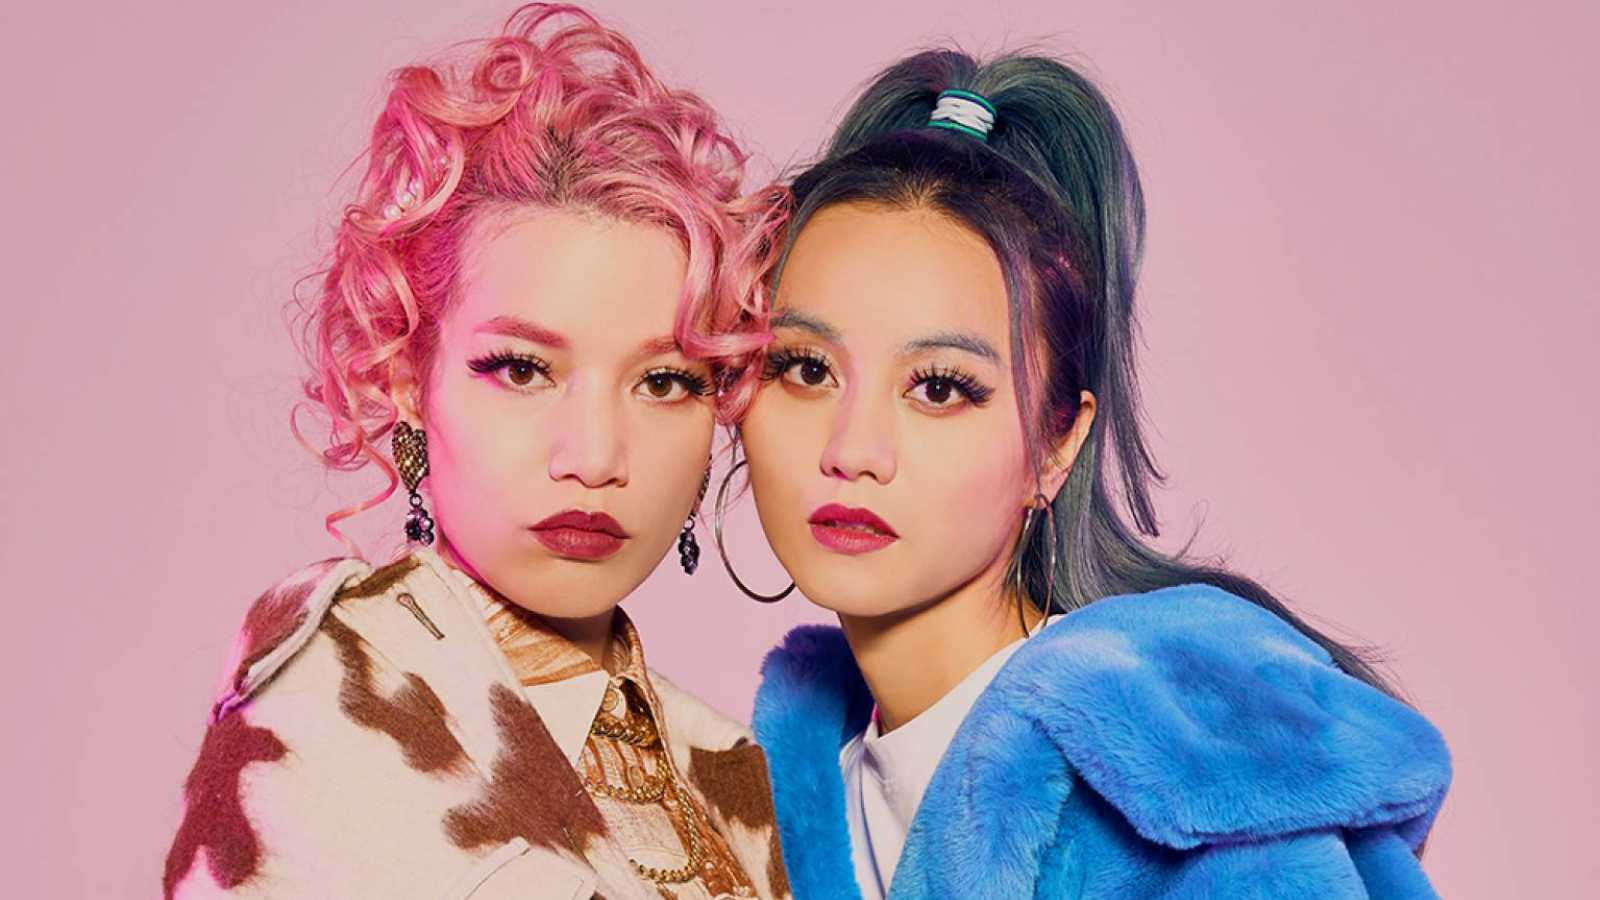 FEMM to Premiere Four Music Videos from New Album 